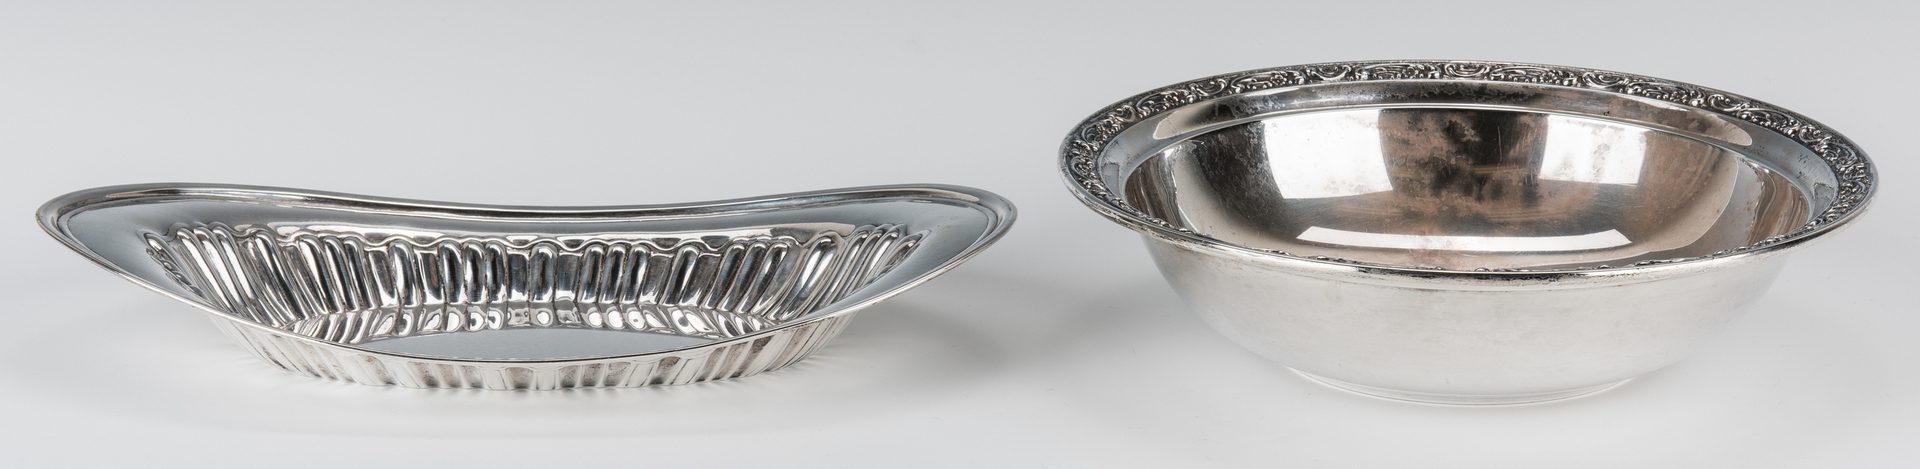 Lot 699: 6 Sterling Silver Serving Items